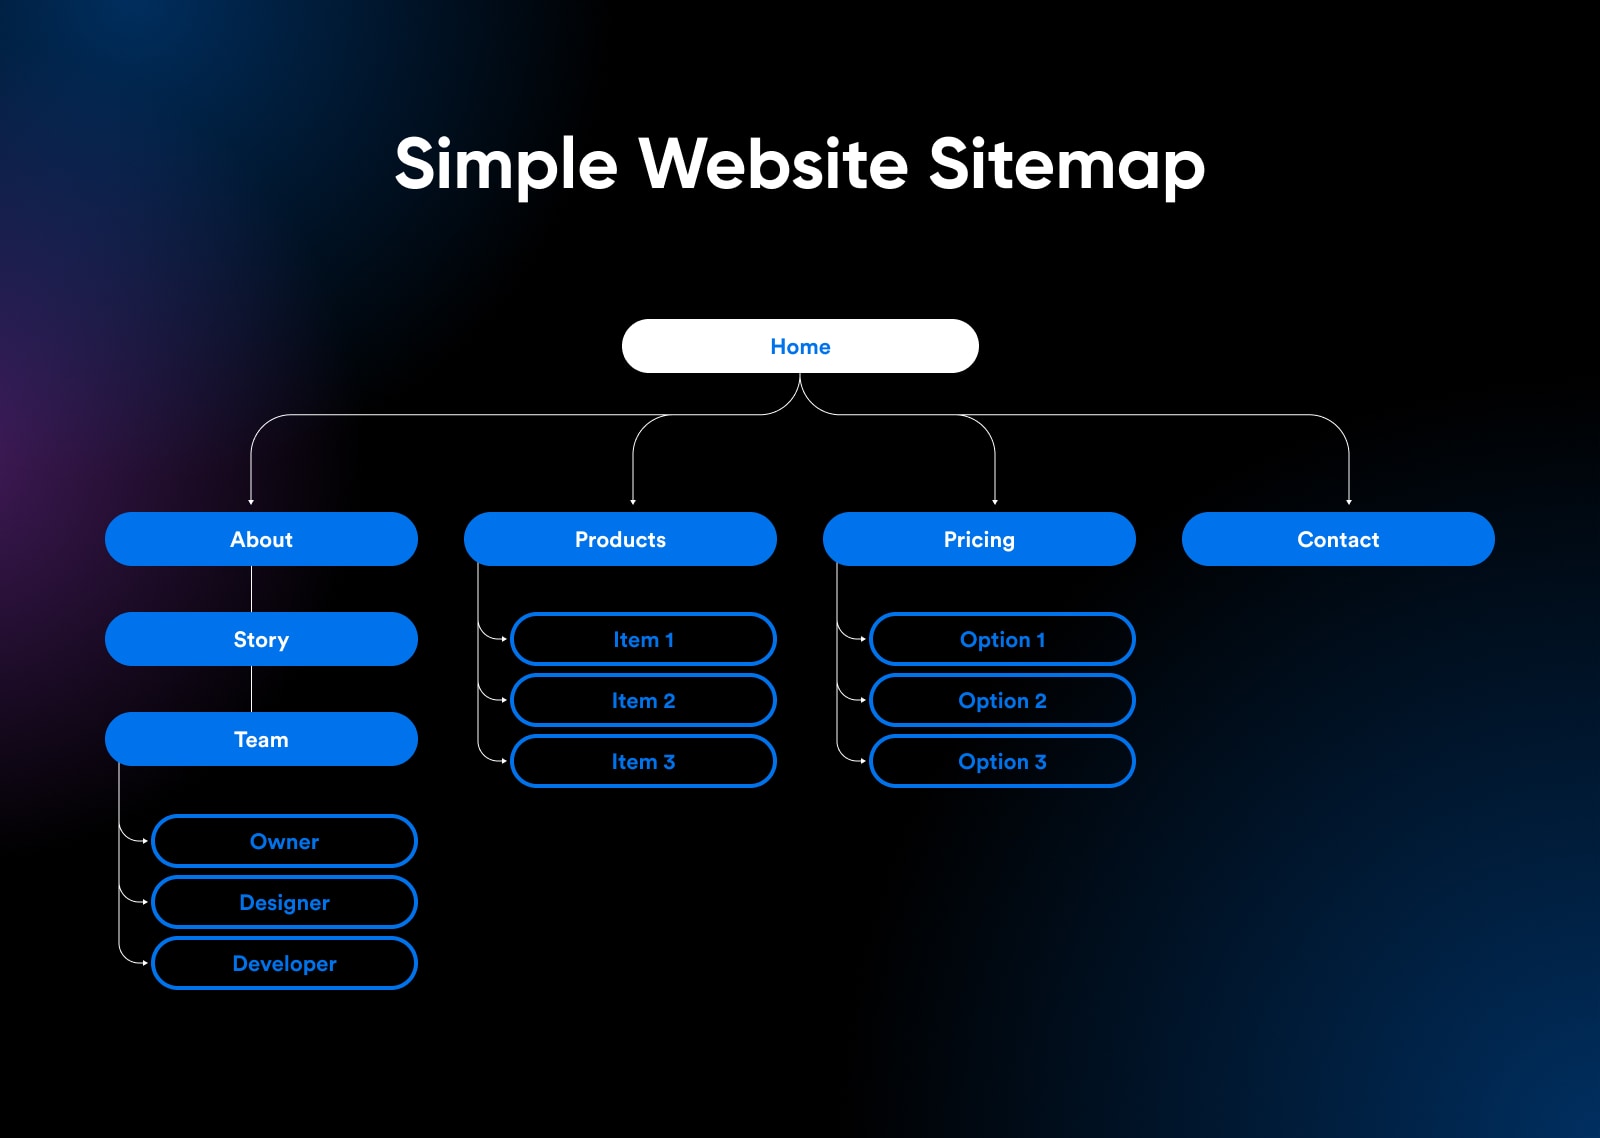 example sitemap showing the home page at the top with brandes to pages like "about" "products" Pricing" and "contact" and each of those have pages within 